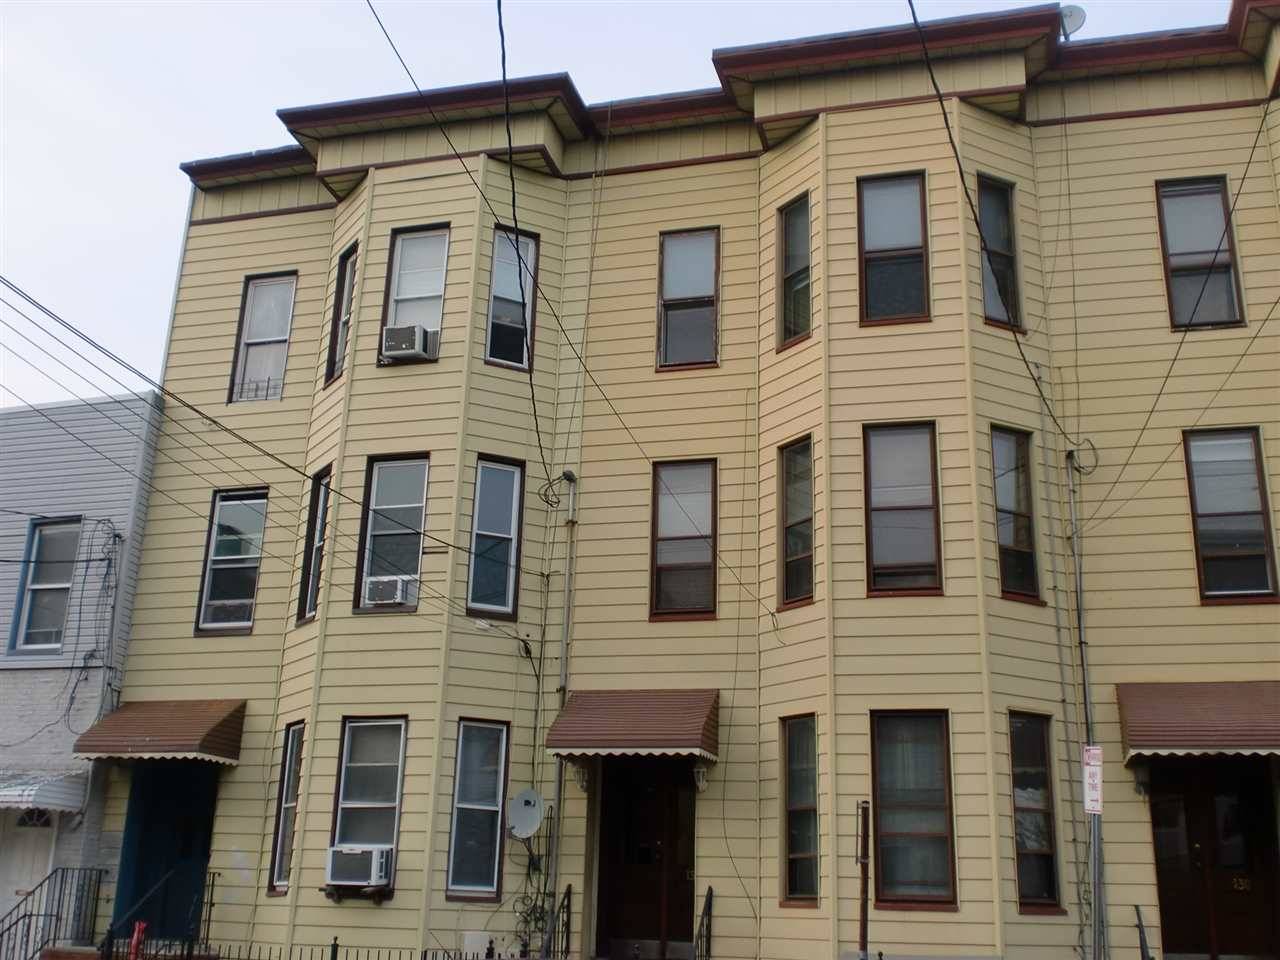 Large 5 room railroad 3rd floor apt in the heart of Jersey City heights